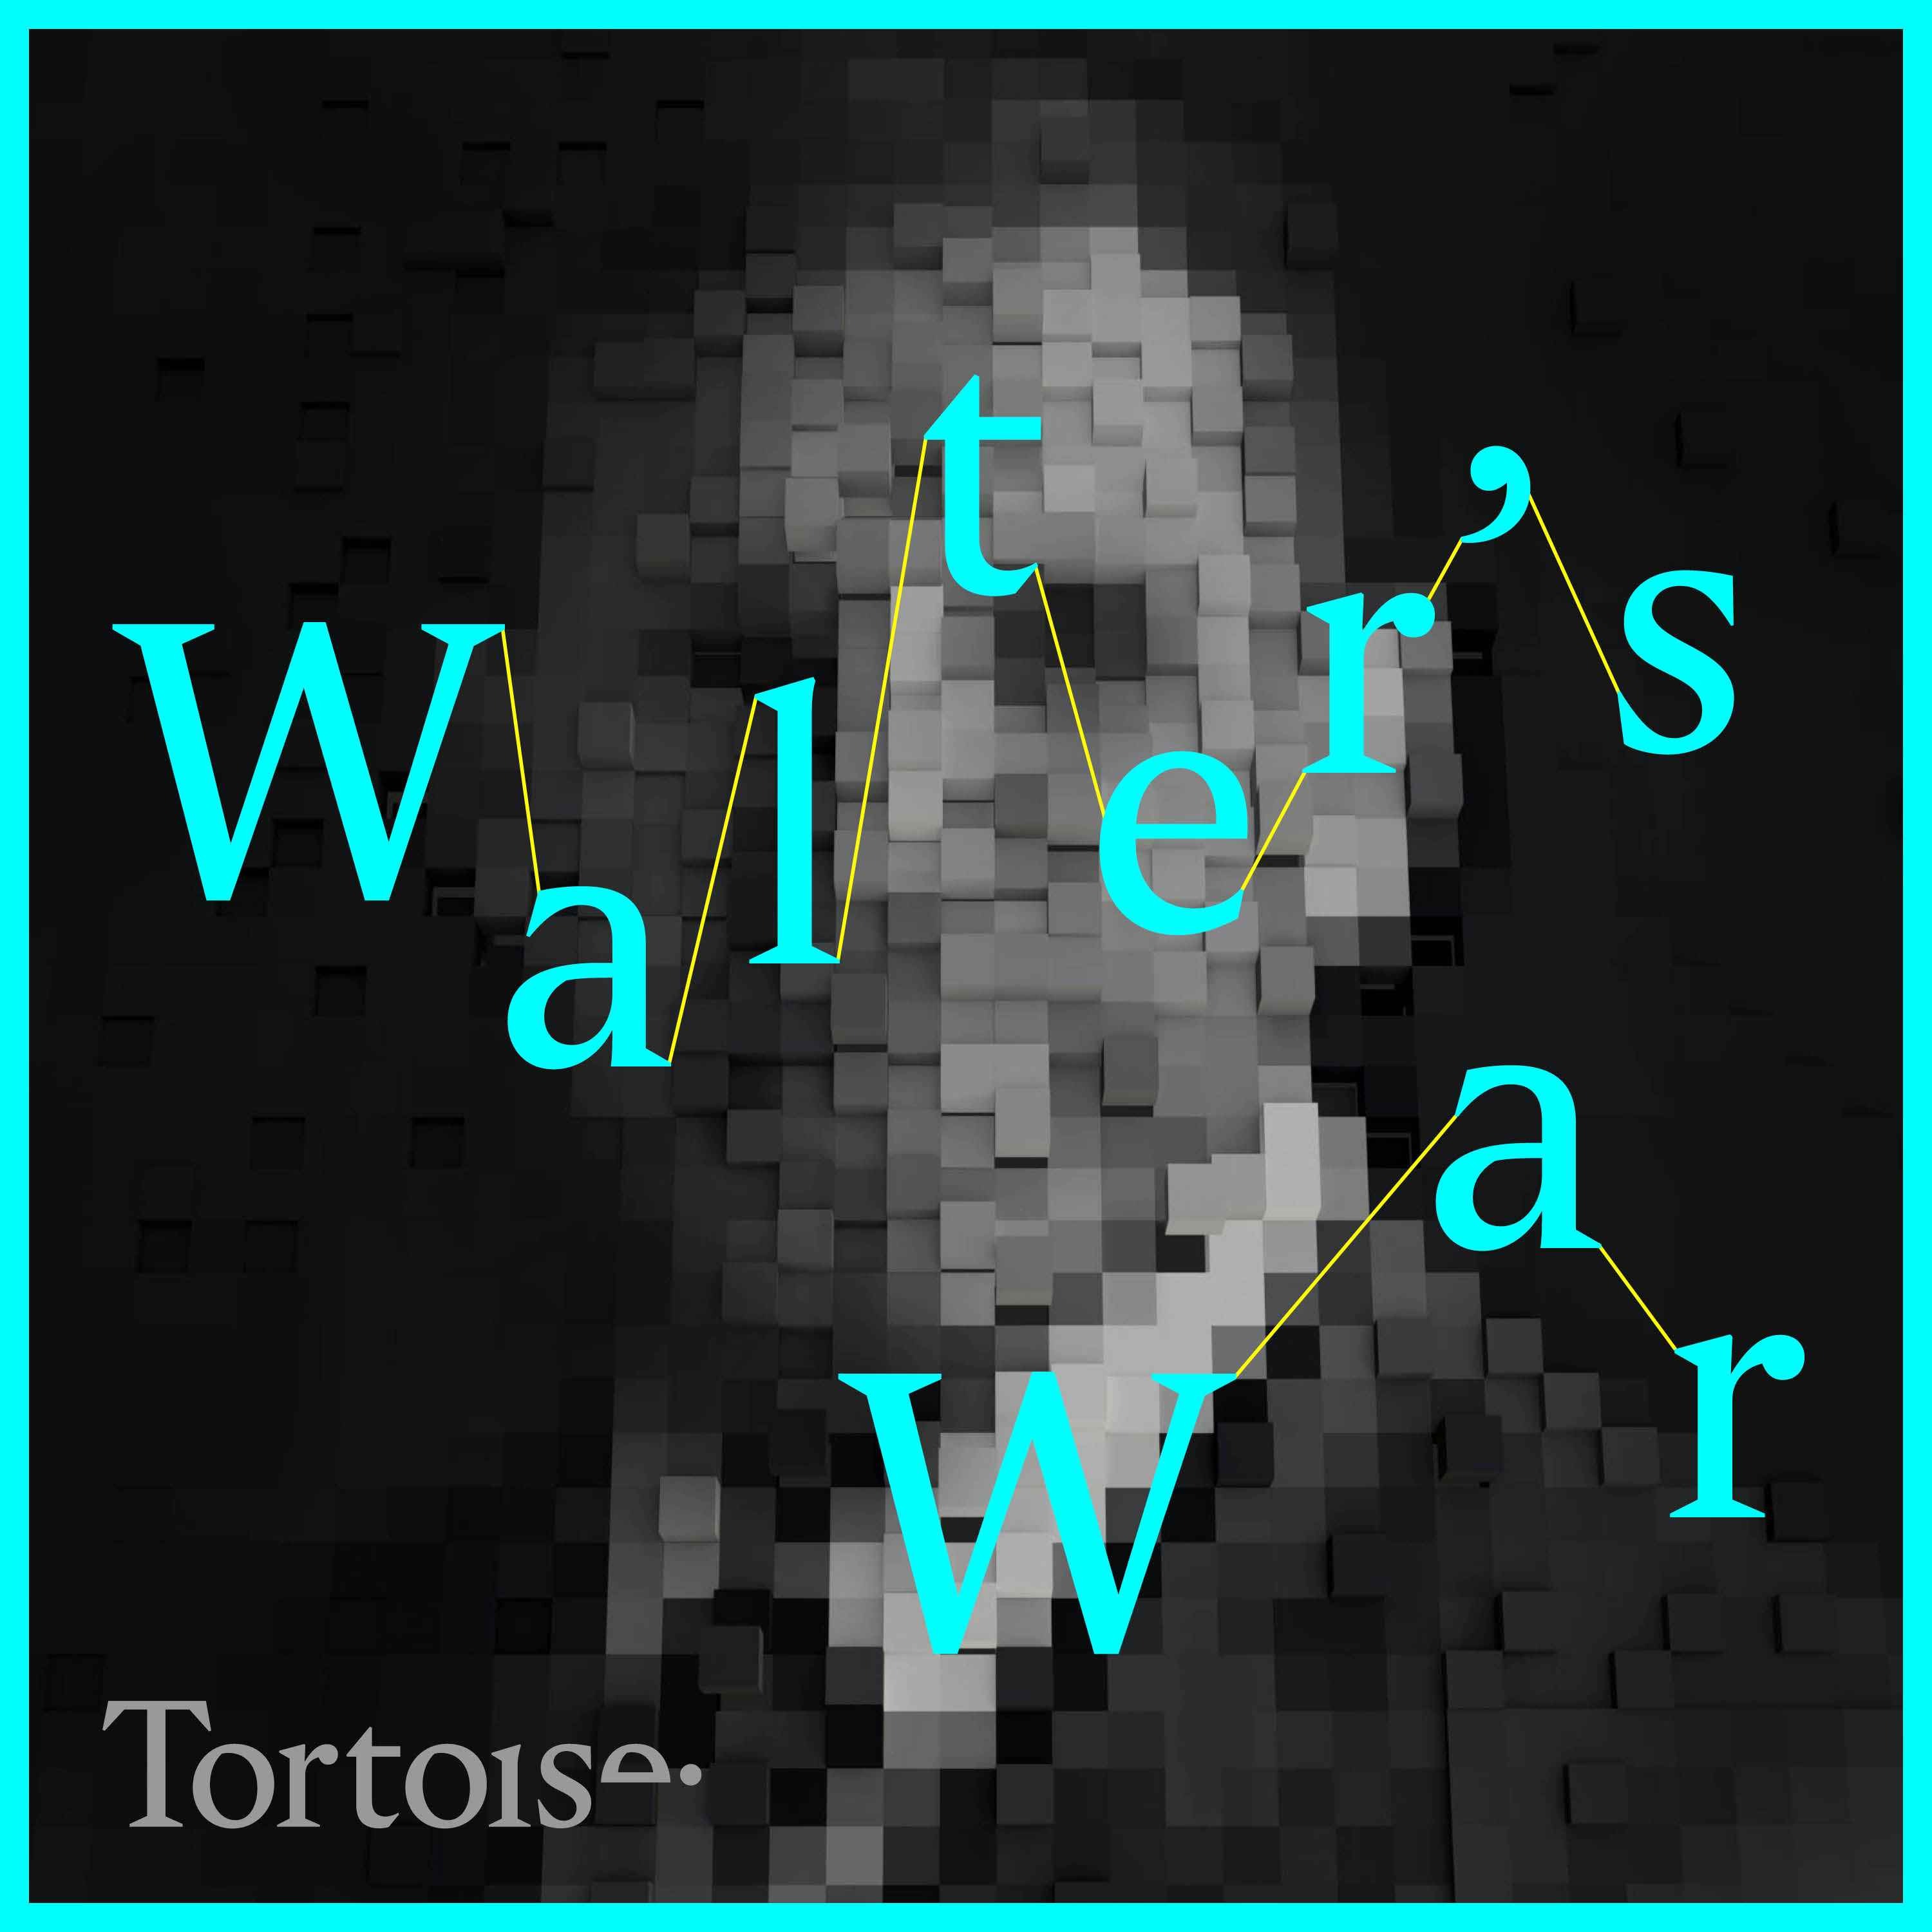 Walter’s War: Episode 4 - The confidence game